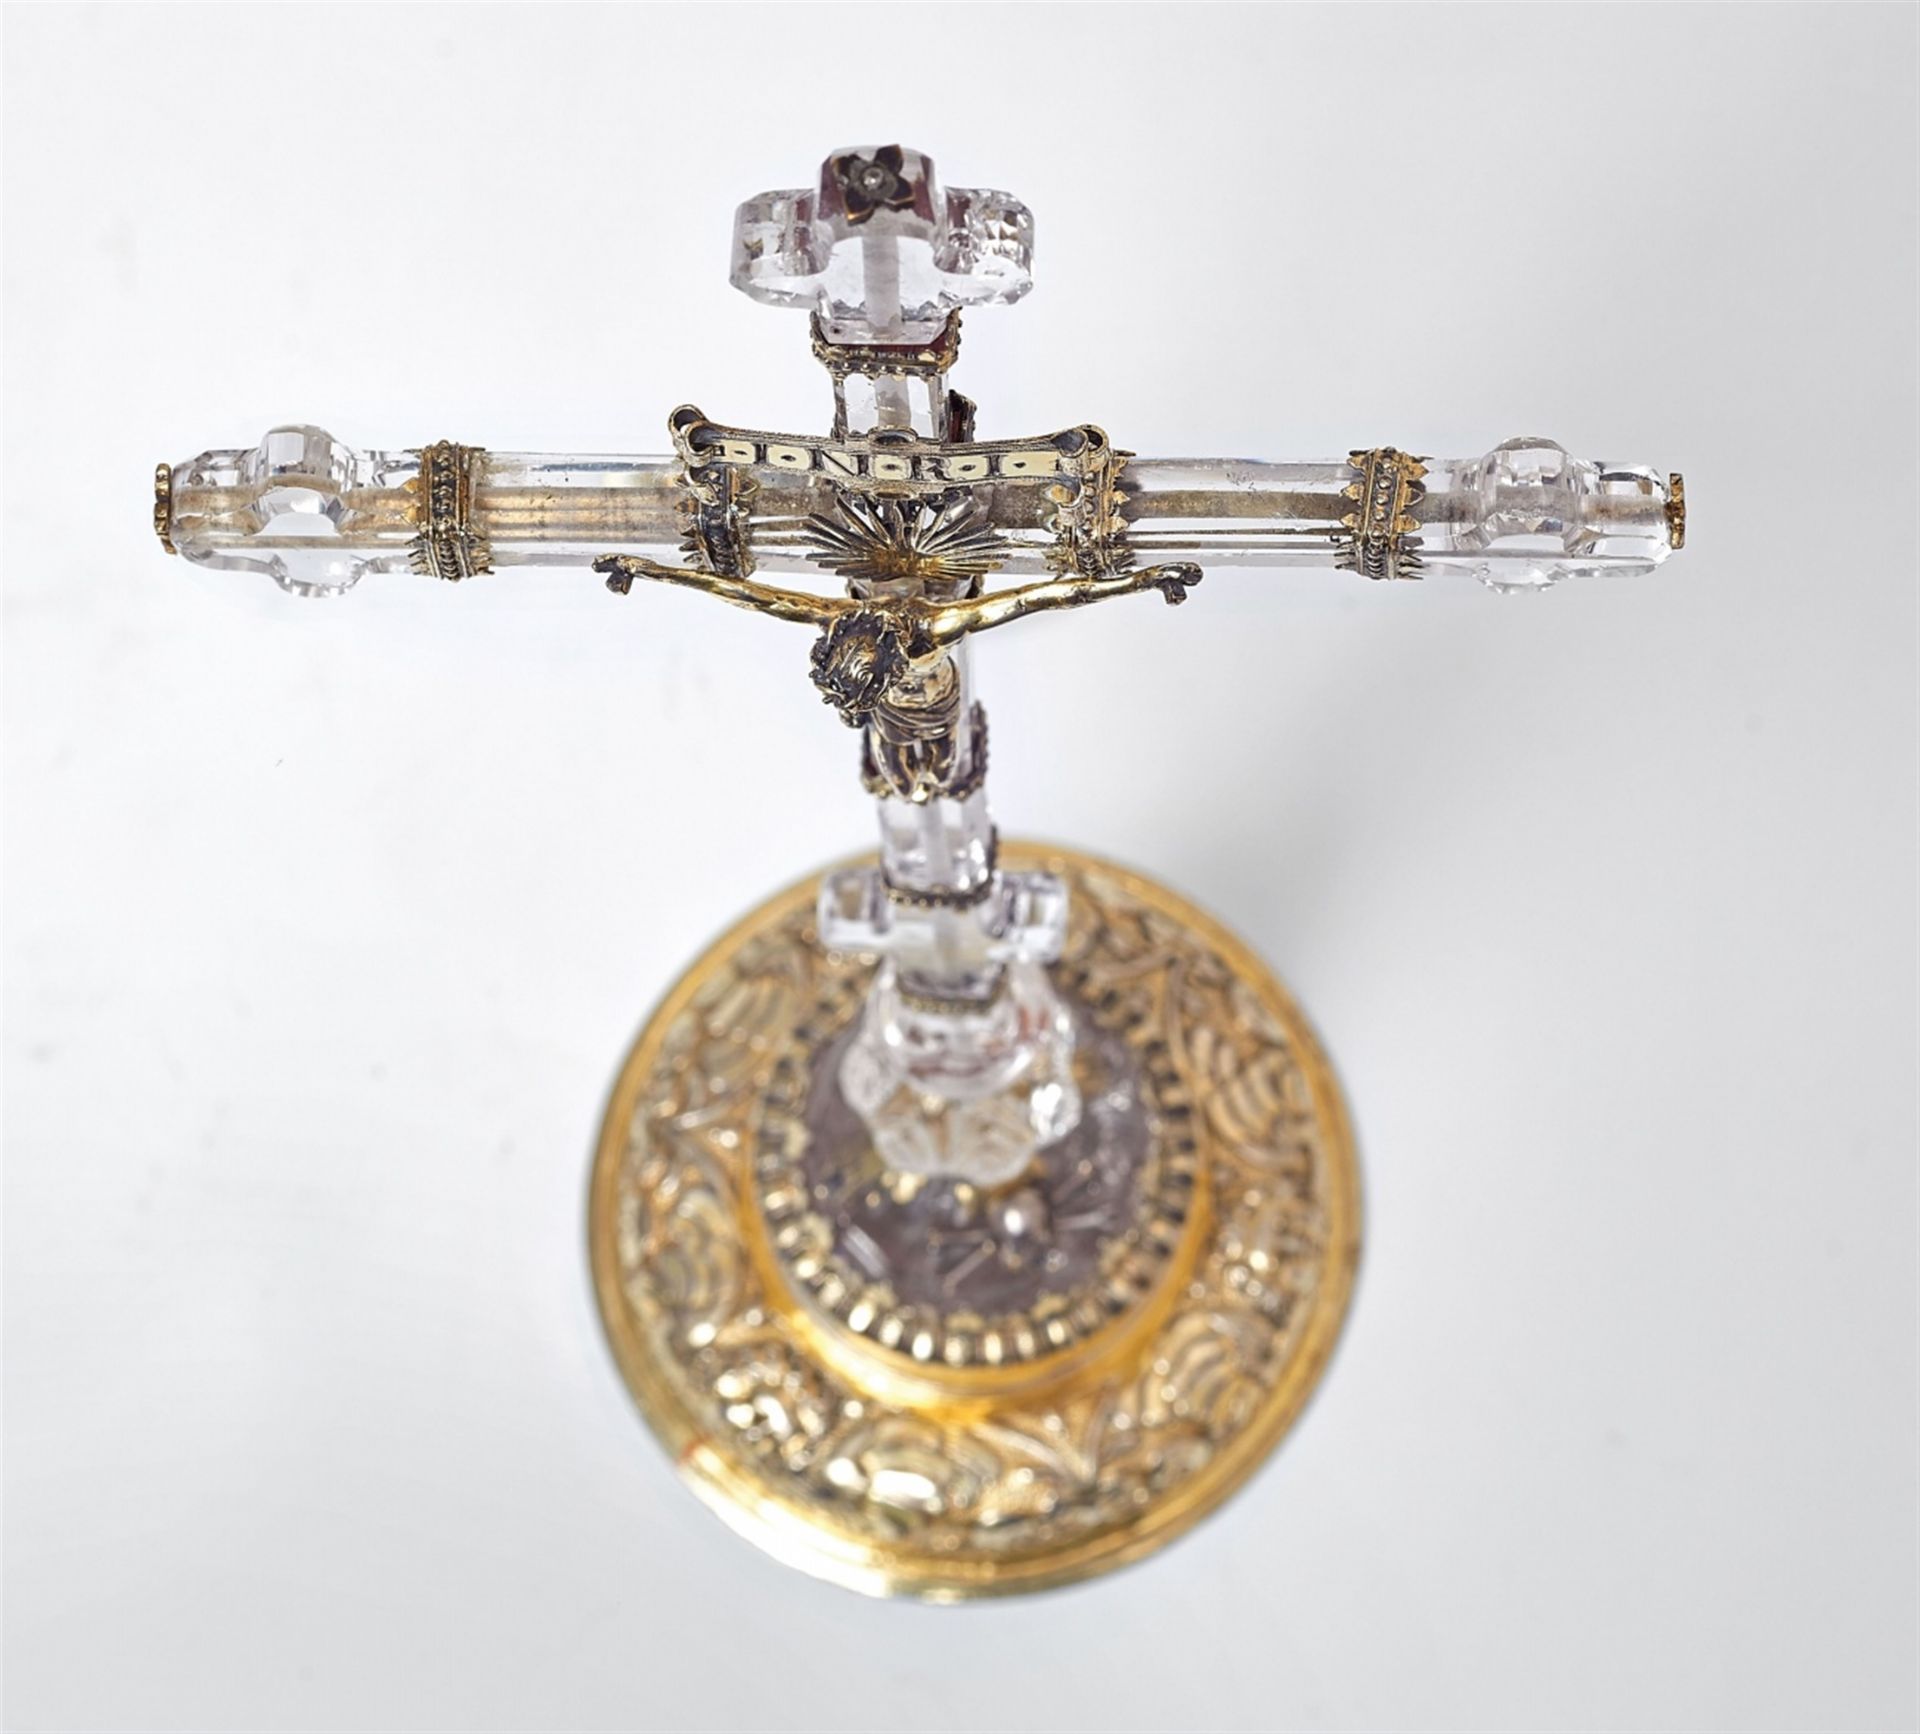 A small silver-mounted rock crystal altar cross, mid-17th century - Image 3 of 8